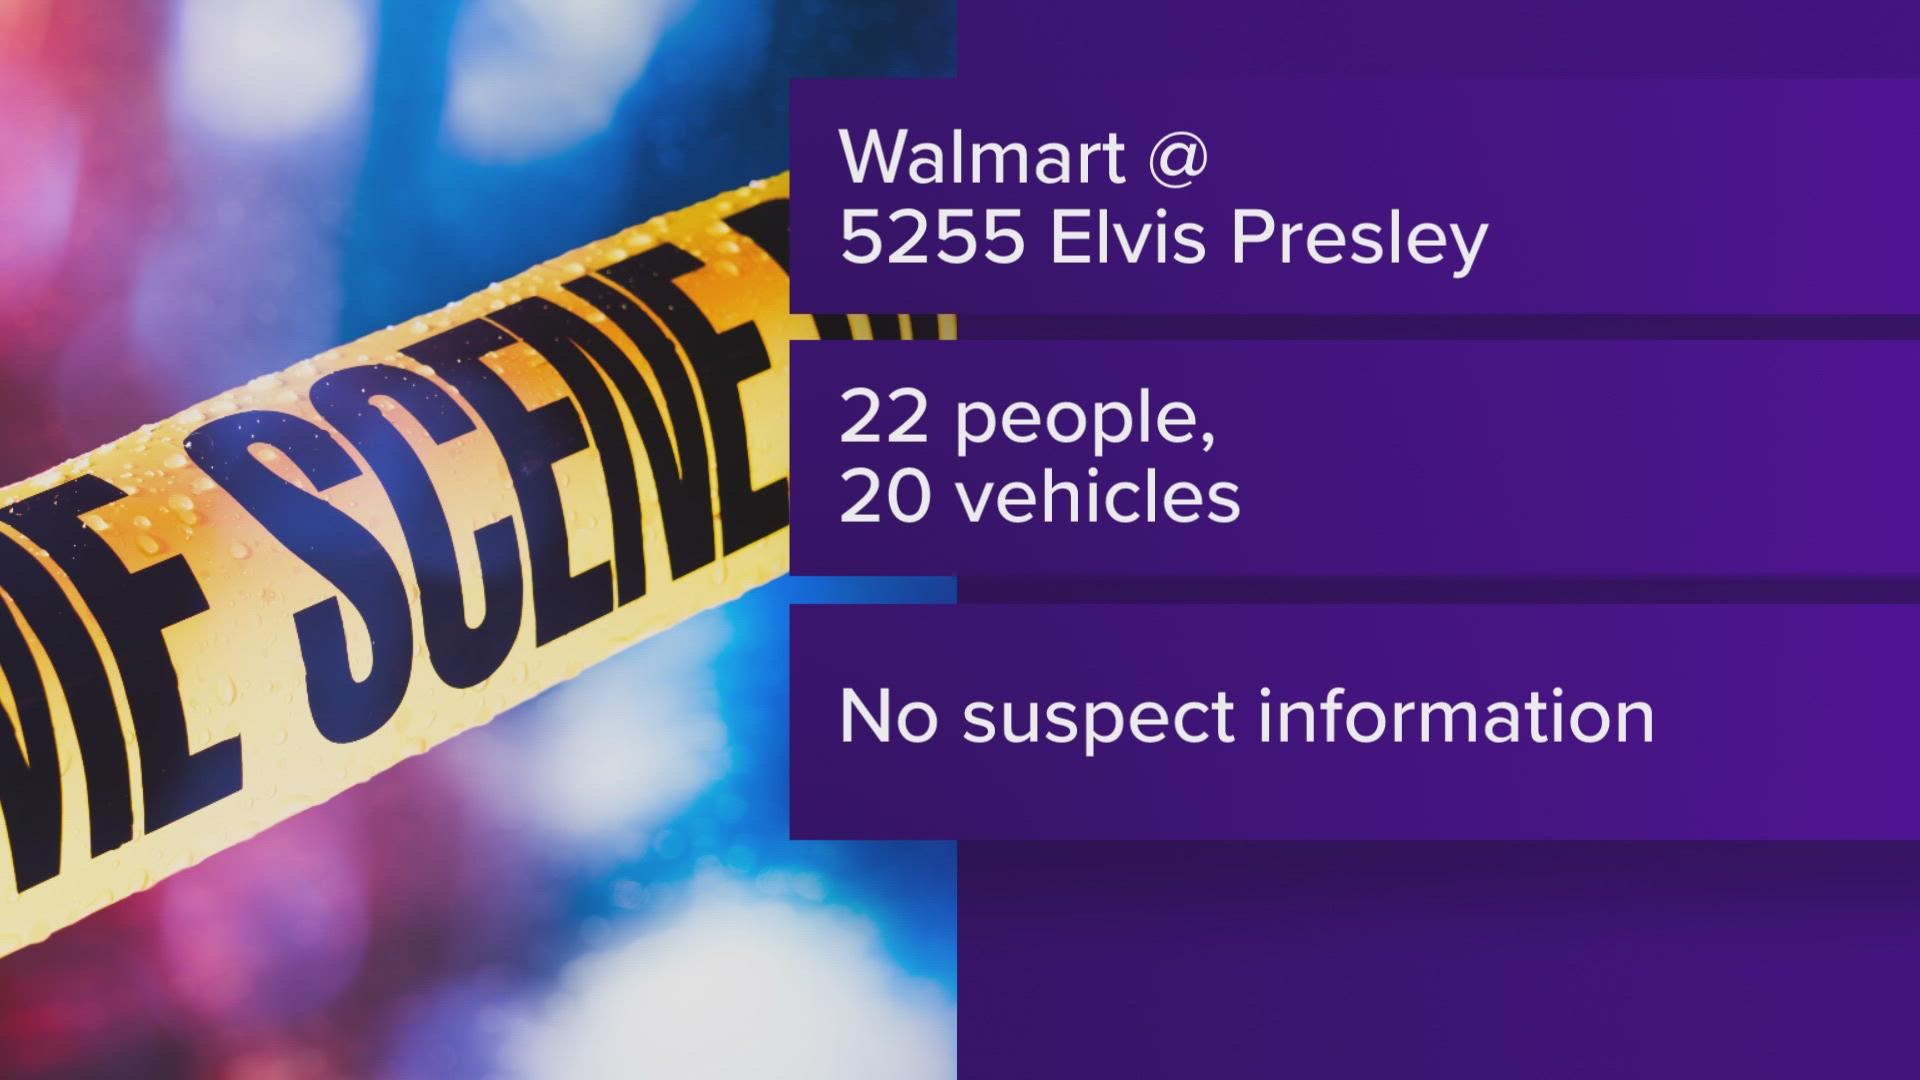 MPD investigators said about 9 p.m. Sunday, about 22 suspects – some of them armed – went into the Walmart store in the 5200 block of Elvis Presley.